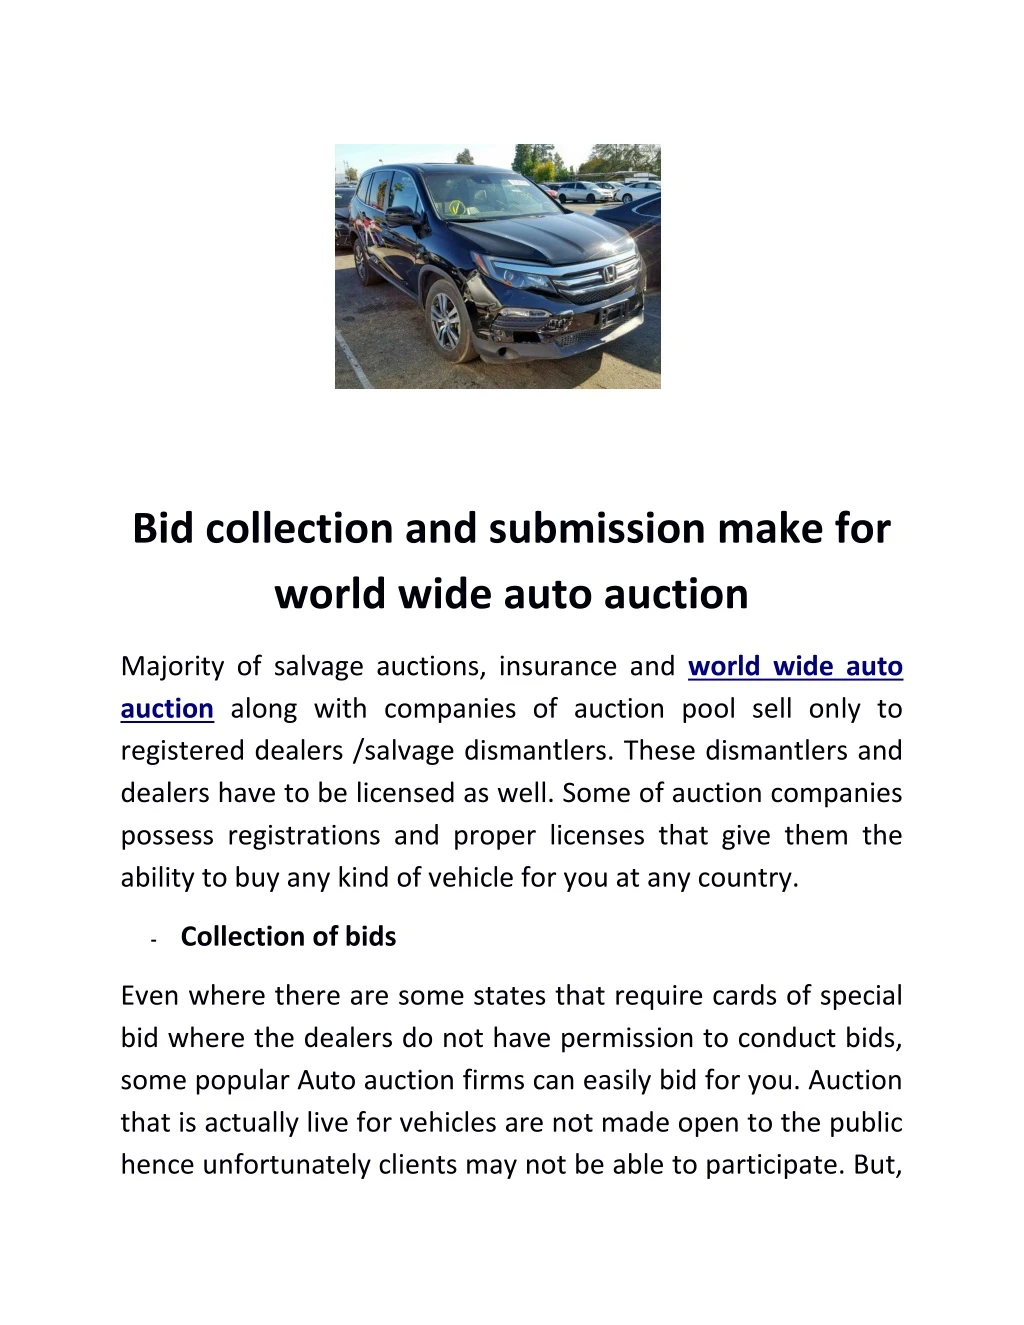 bid collection and submission make for world wide